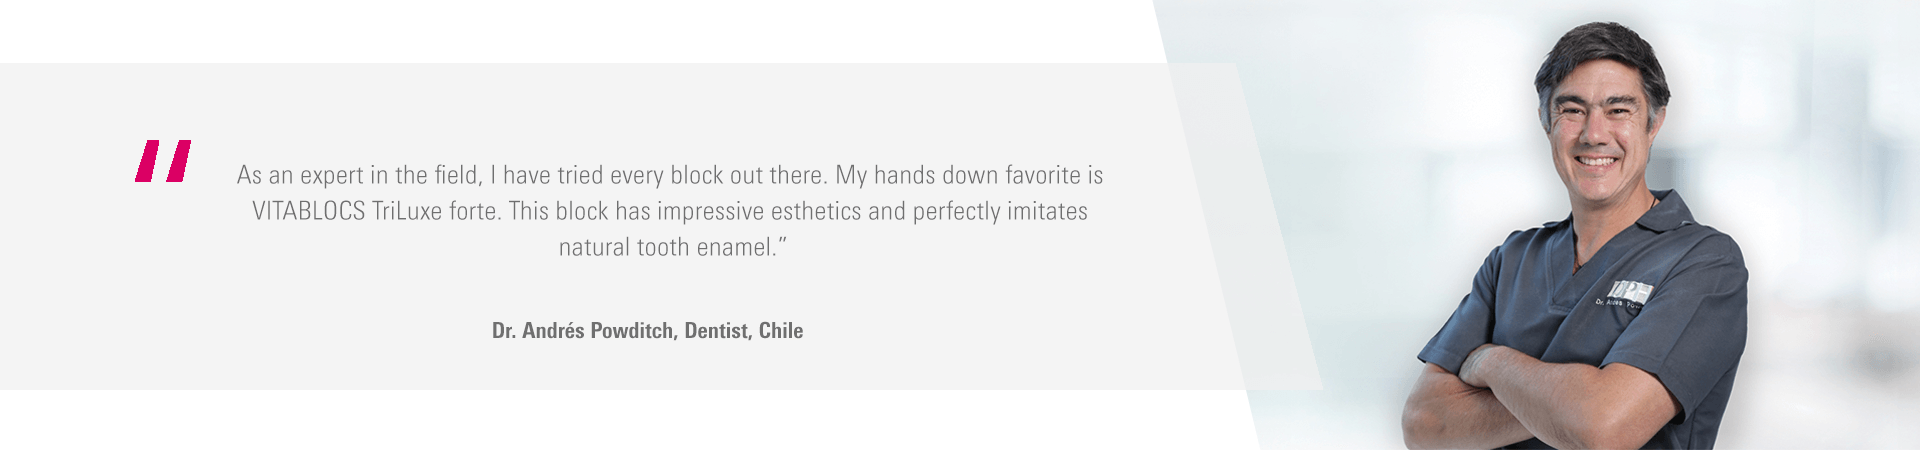 "As an expert in the field, I have tried every block out there. My hands down favorite is VITABLOCS TriLuxe forte. This block has impressive esthetics and perfectly imitates natural tooth enamel." - Dr. Andres Powdtich, Dentist, Chile